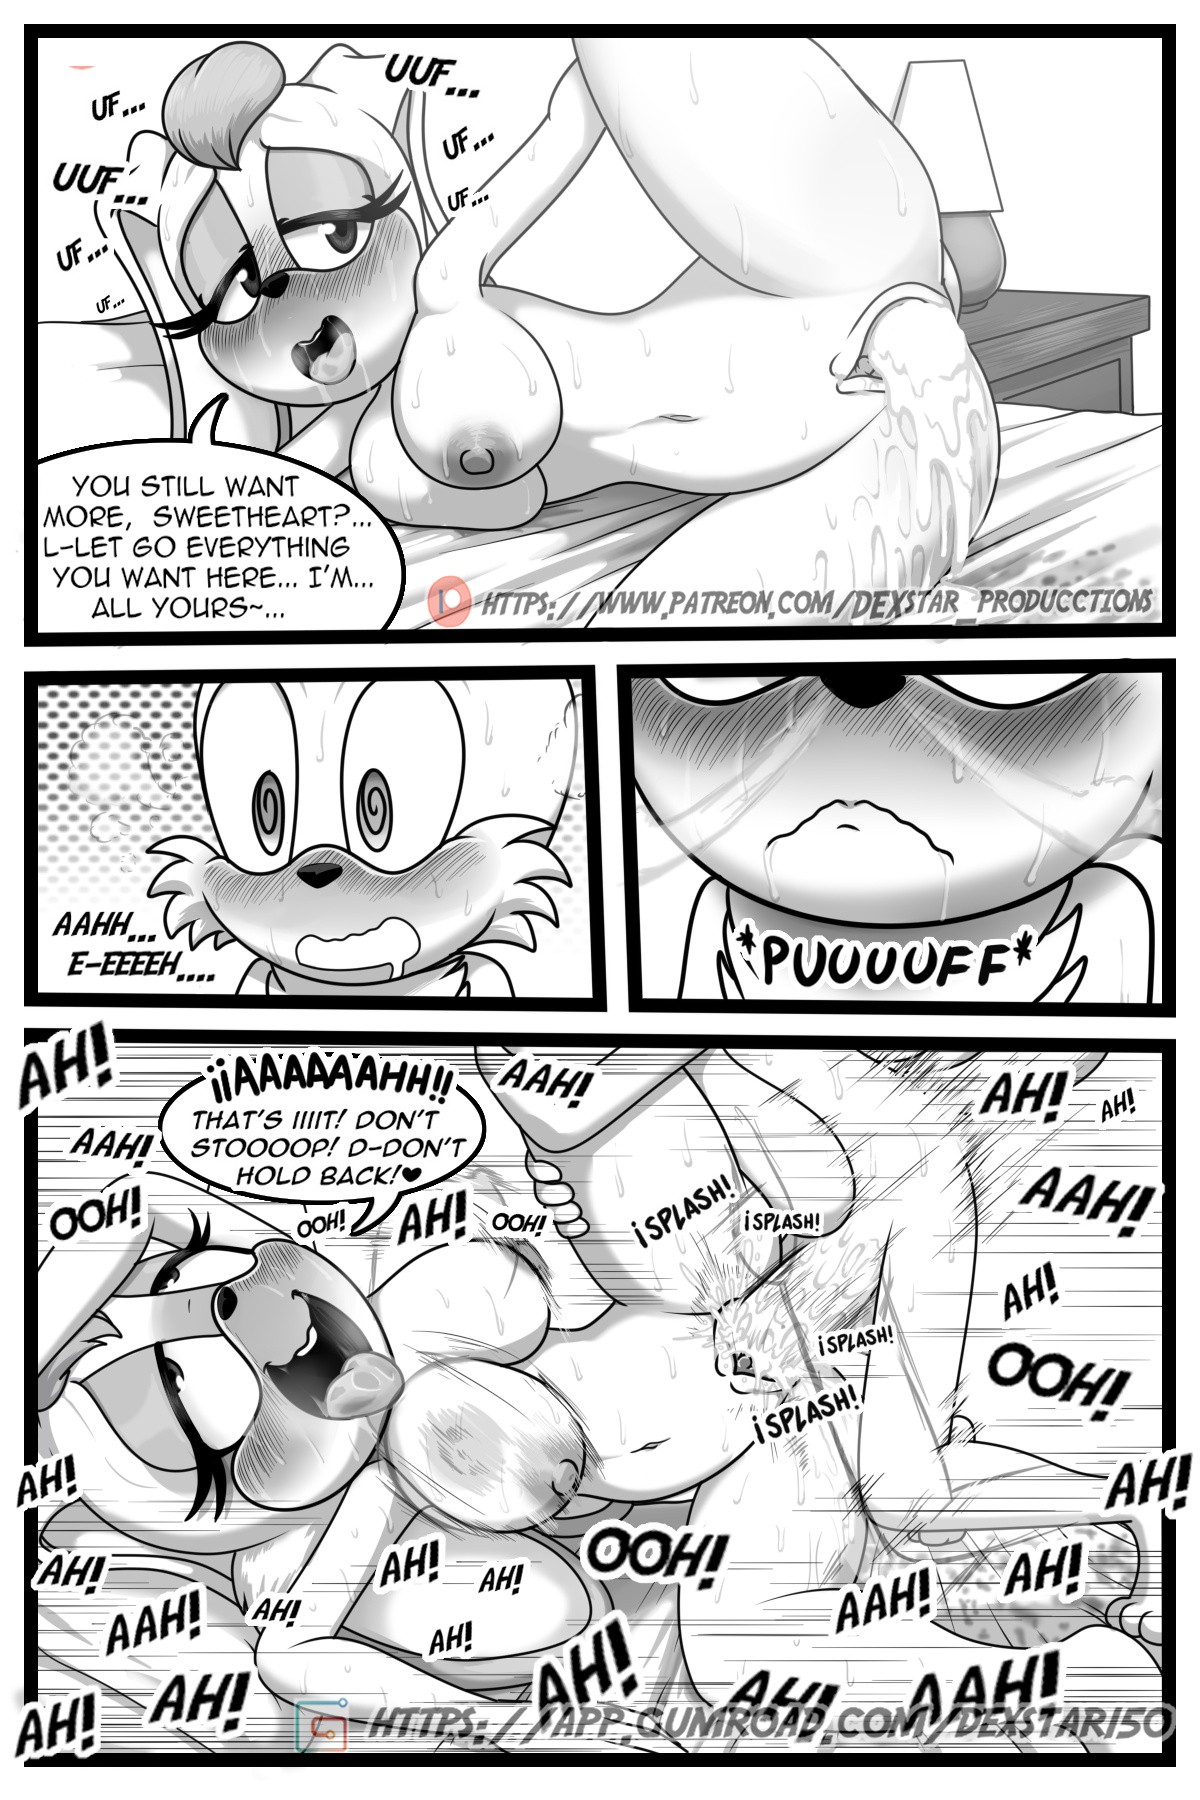 PLEASE FUCK ME - Cream x Tail (Extra Story!) porn comic picture 22